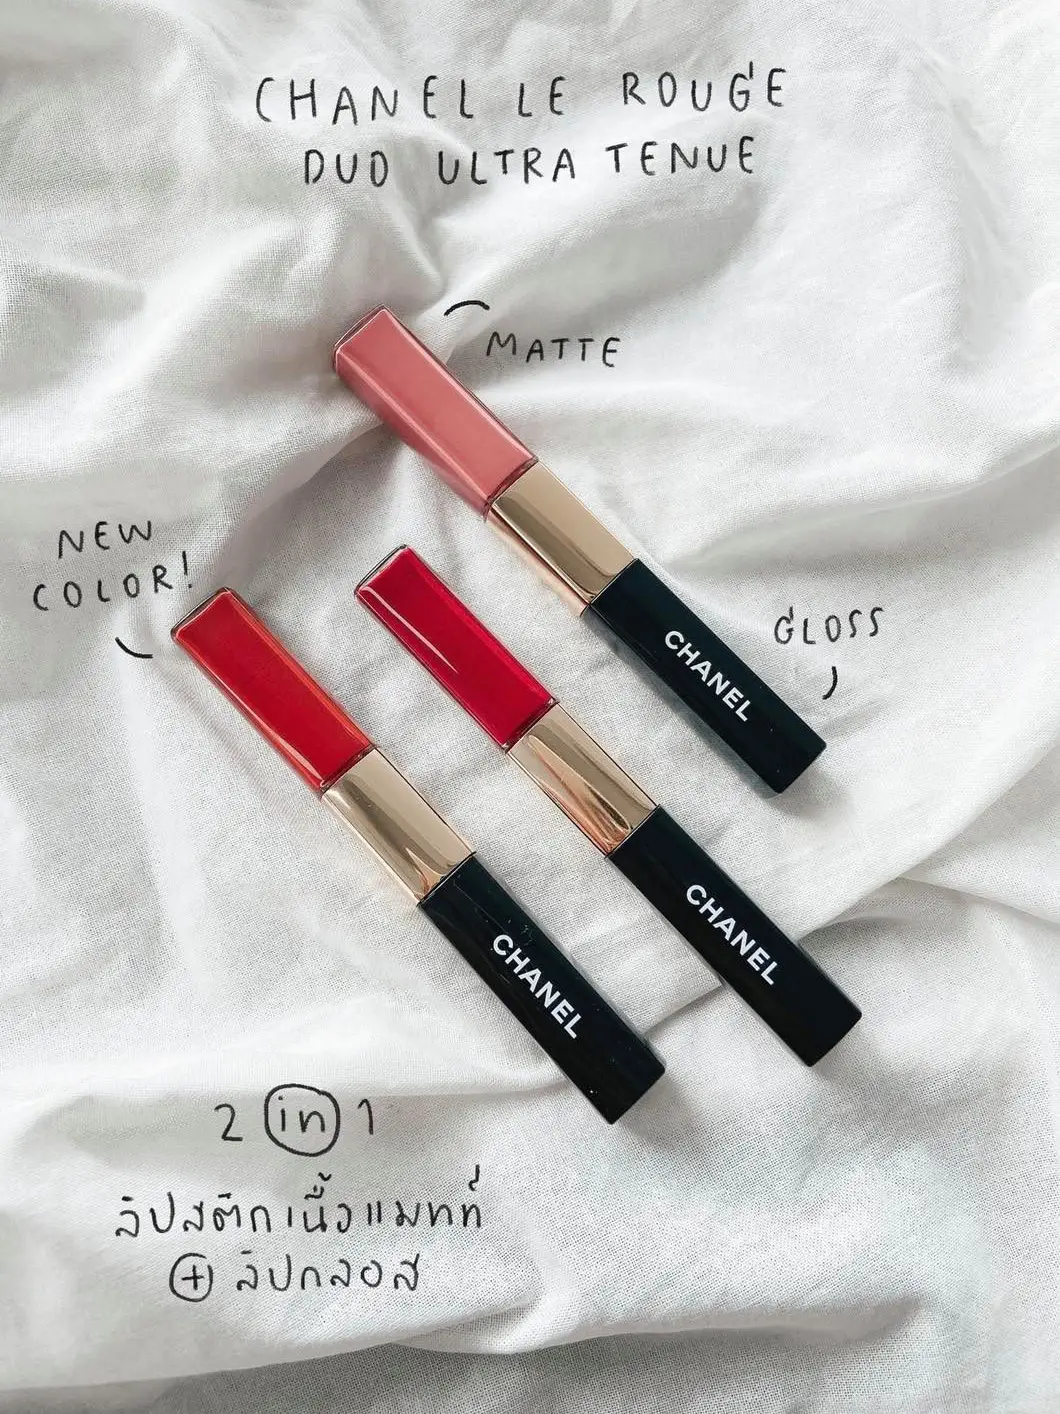 Chanel Le Rouge Duo Ultra Dress, Gallery posted by ployhomx